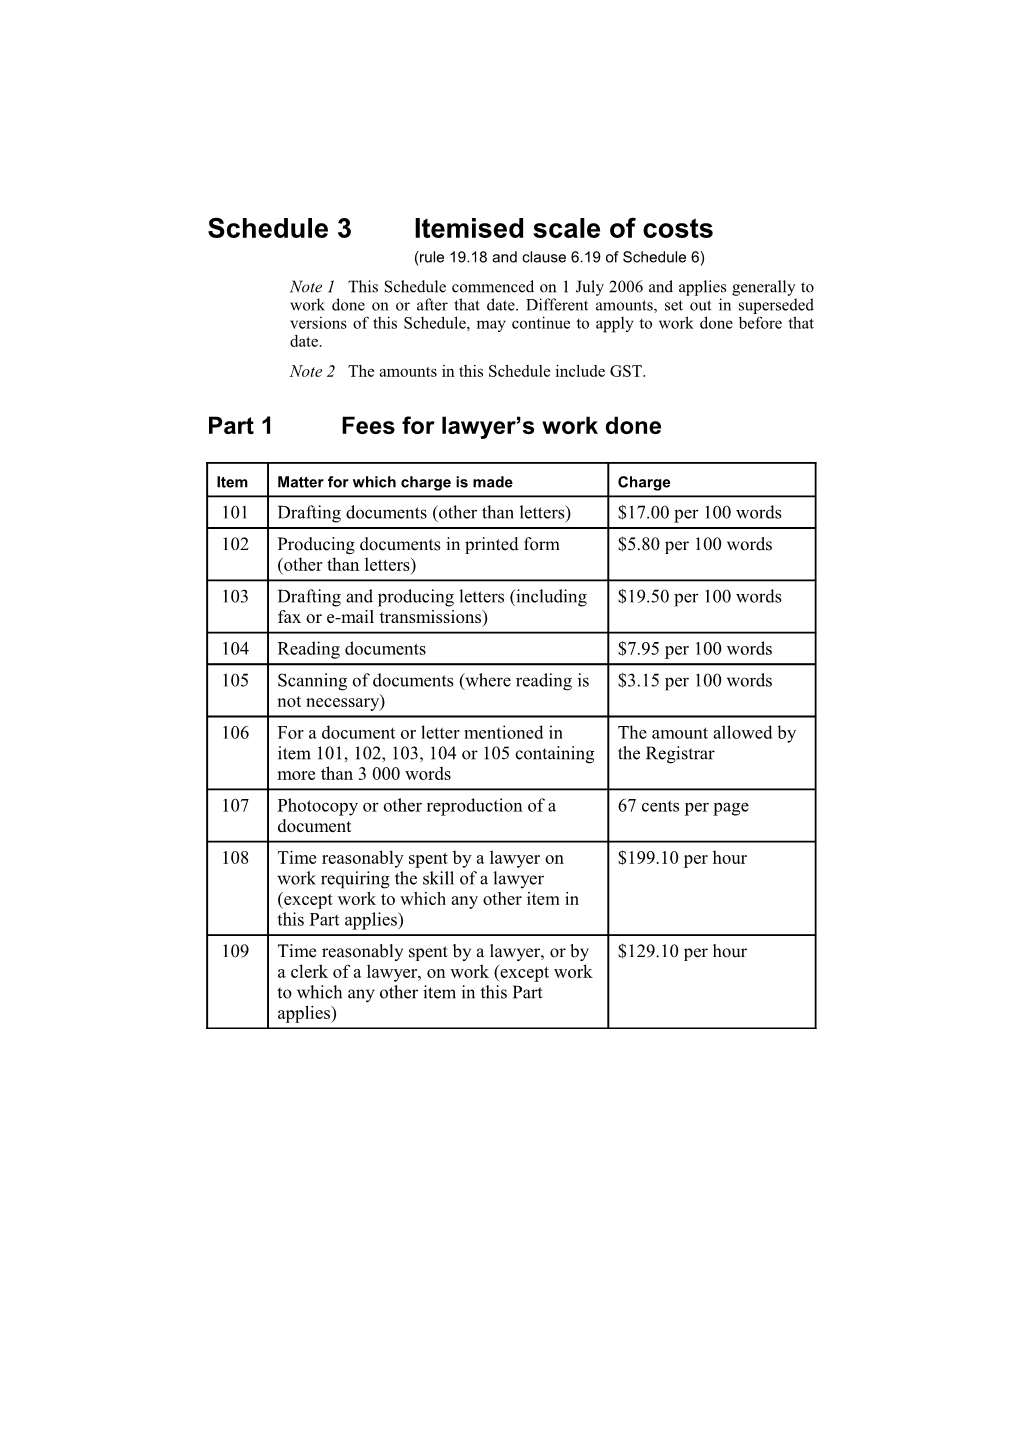 Schedule 3Itemised Scale of Costs